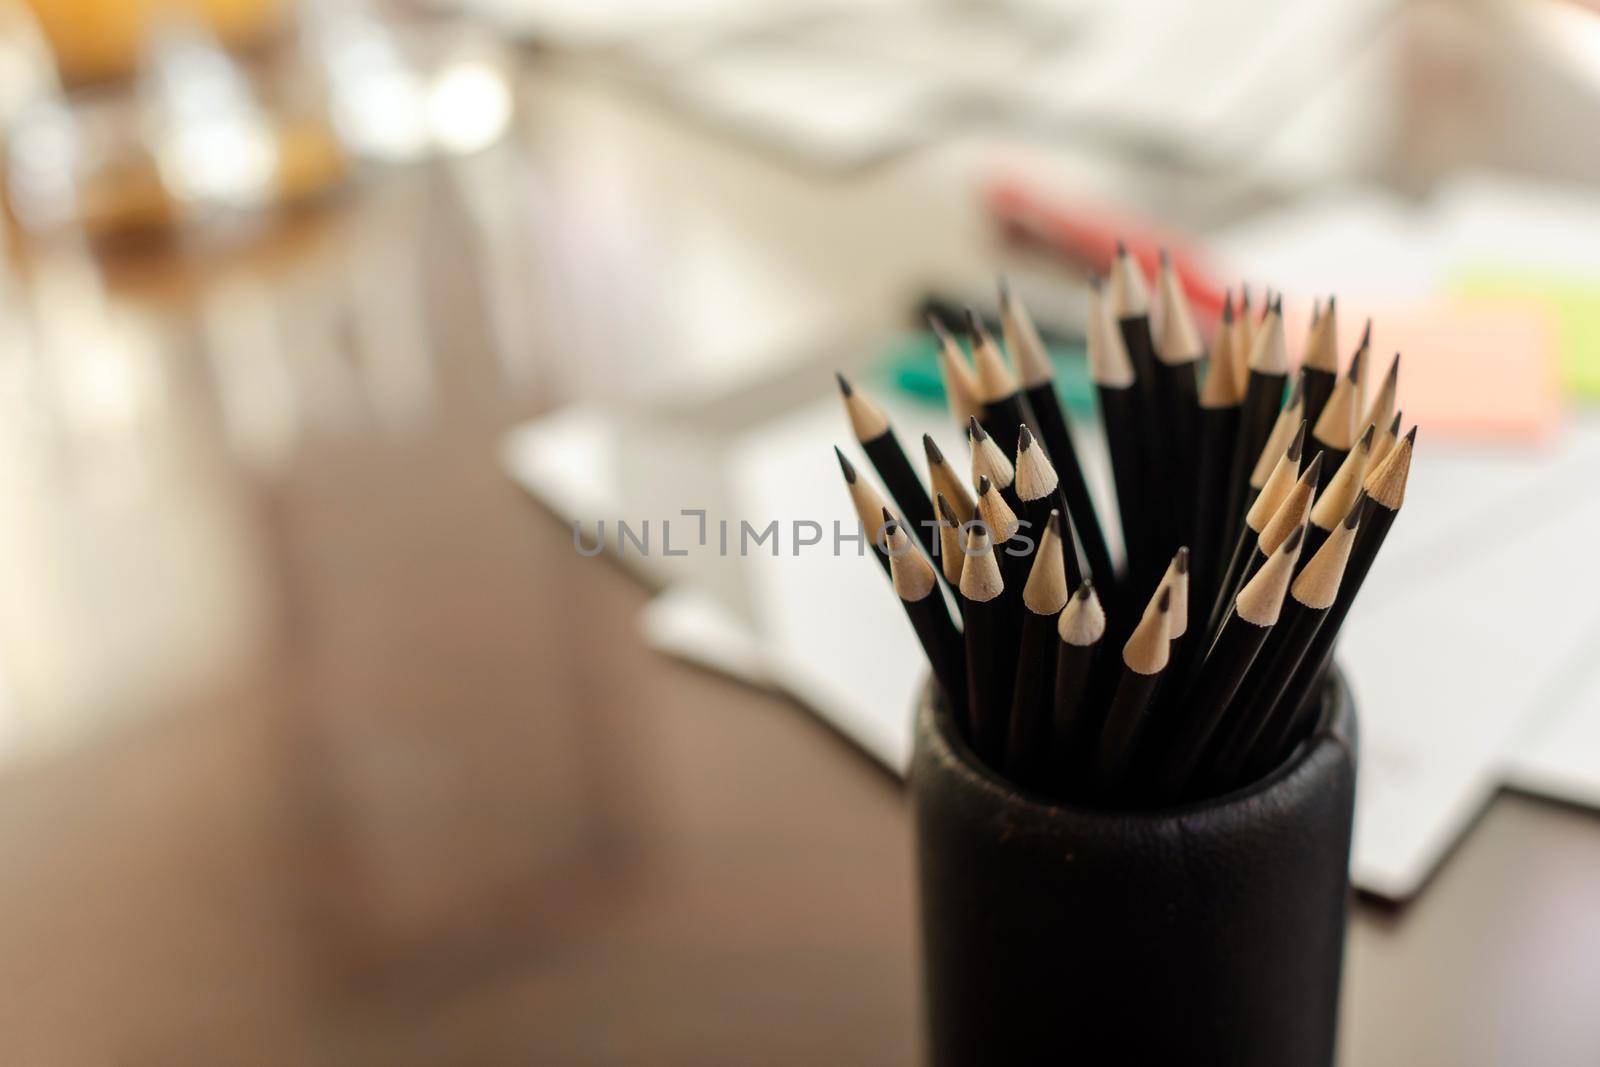 From above bunch of graphite pencil in holder on table with blurred stationery items